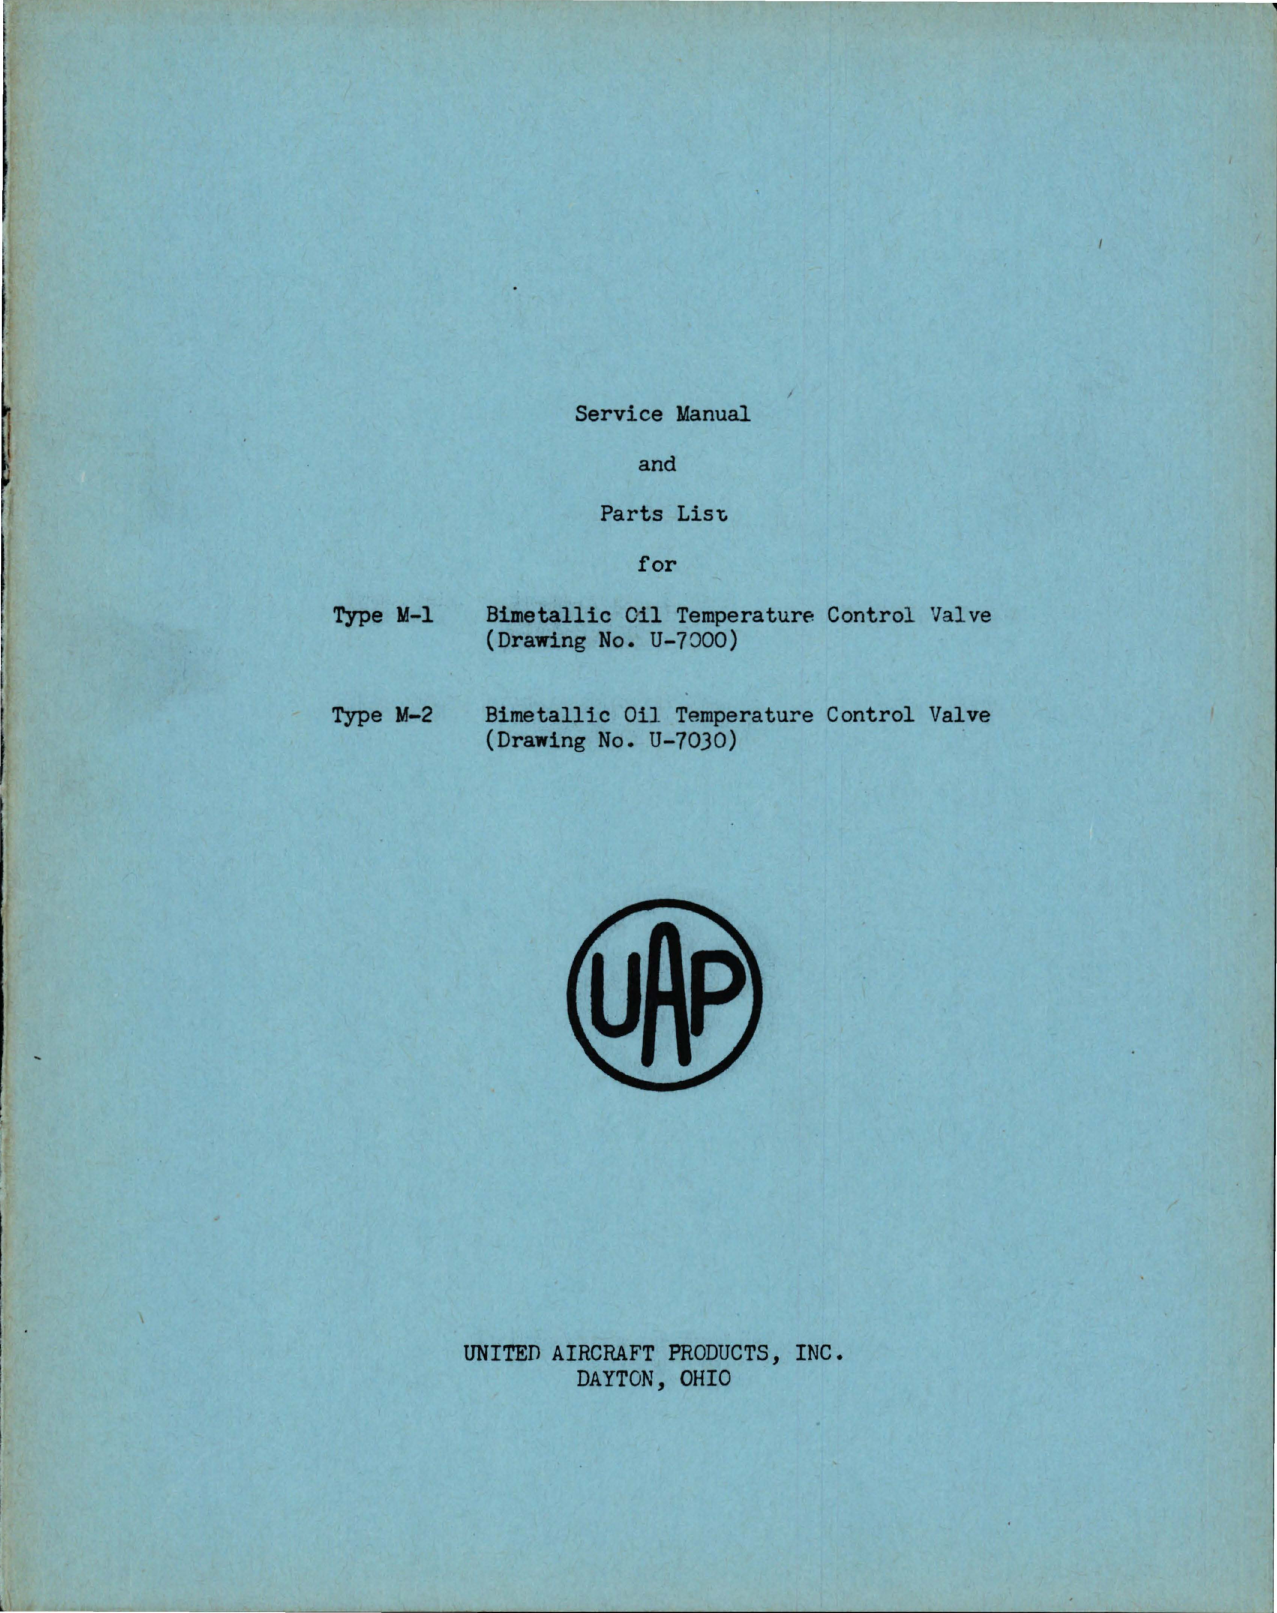 Sample page 1 from AirCorps Library document: Service Manual and Parts List for Bimetallic Oil Temperature Control Valve - Types M-1 and M-2